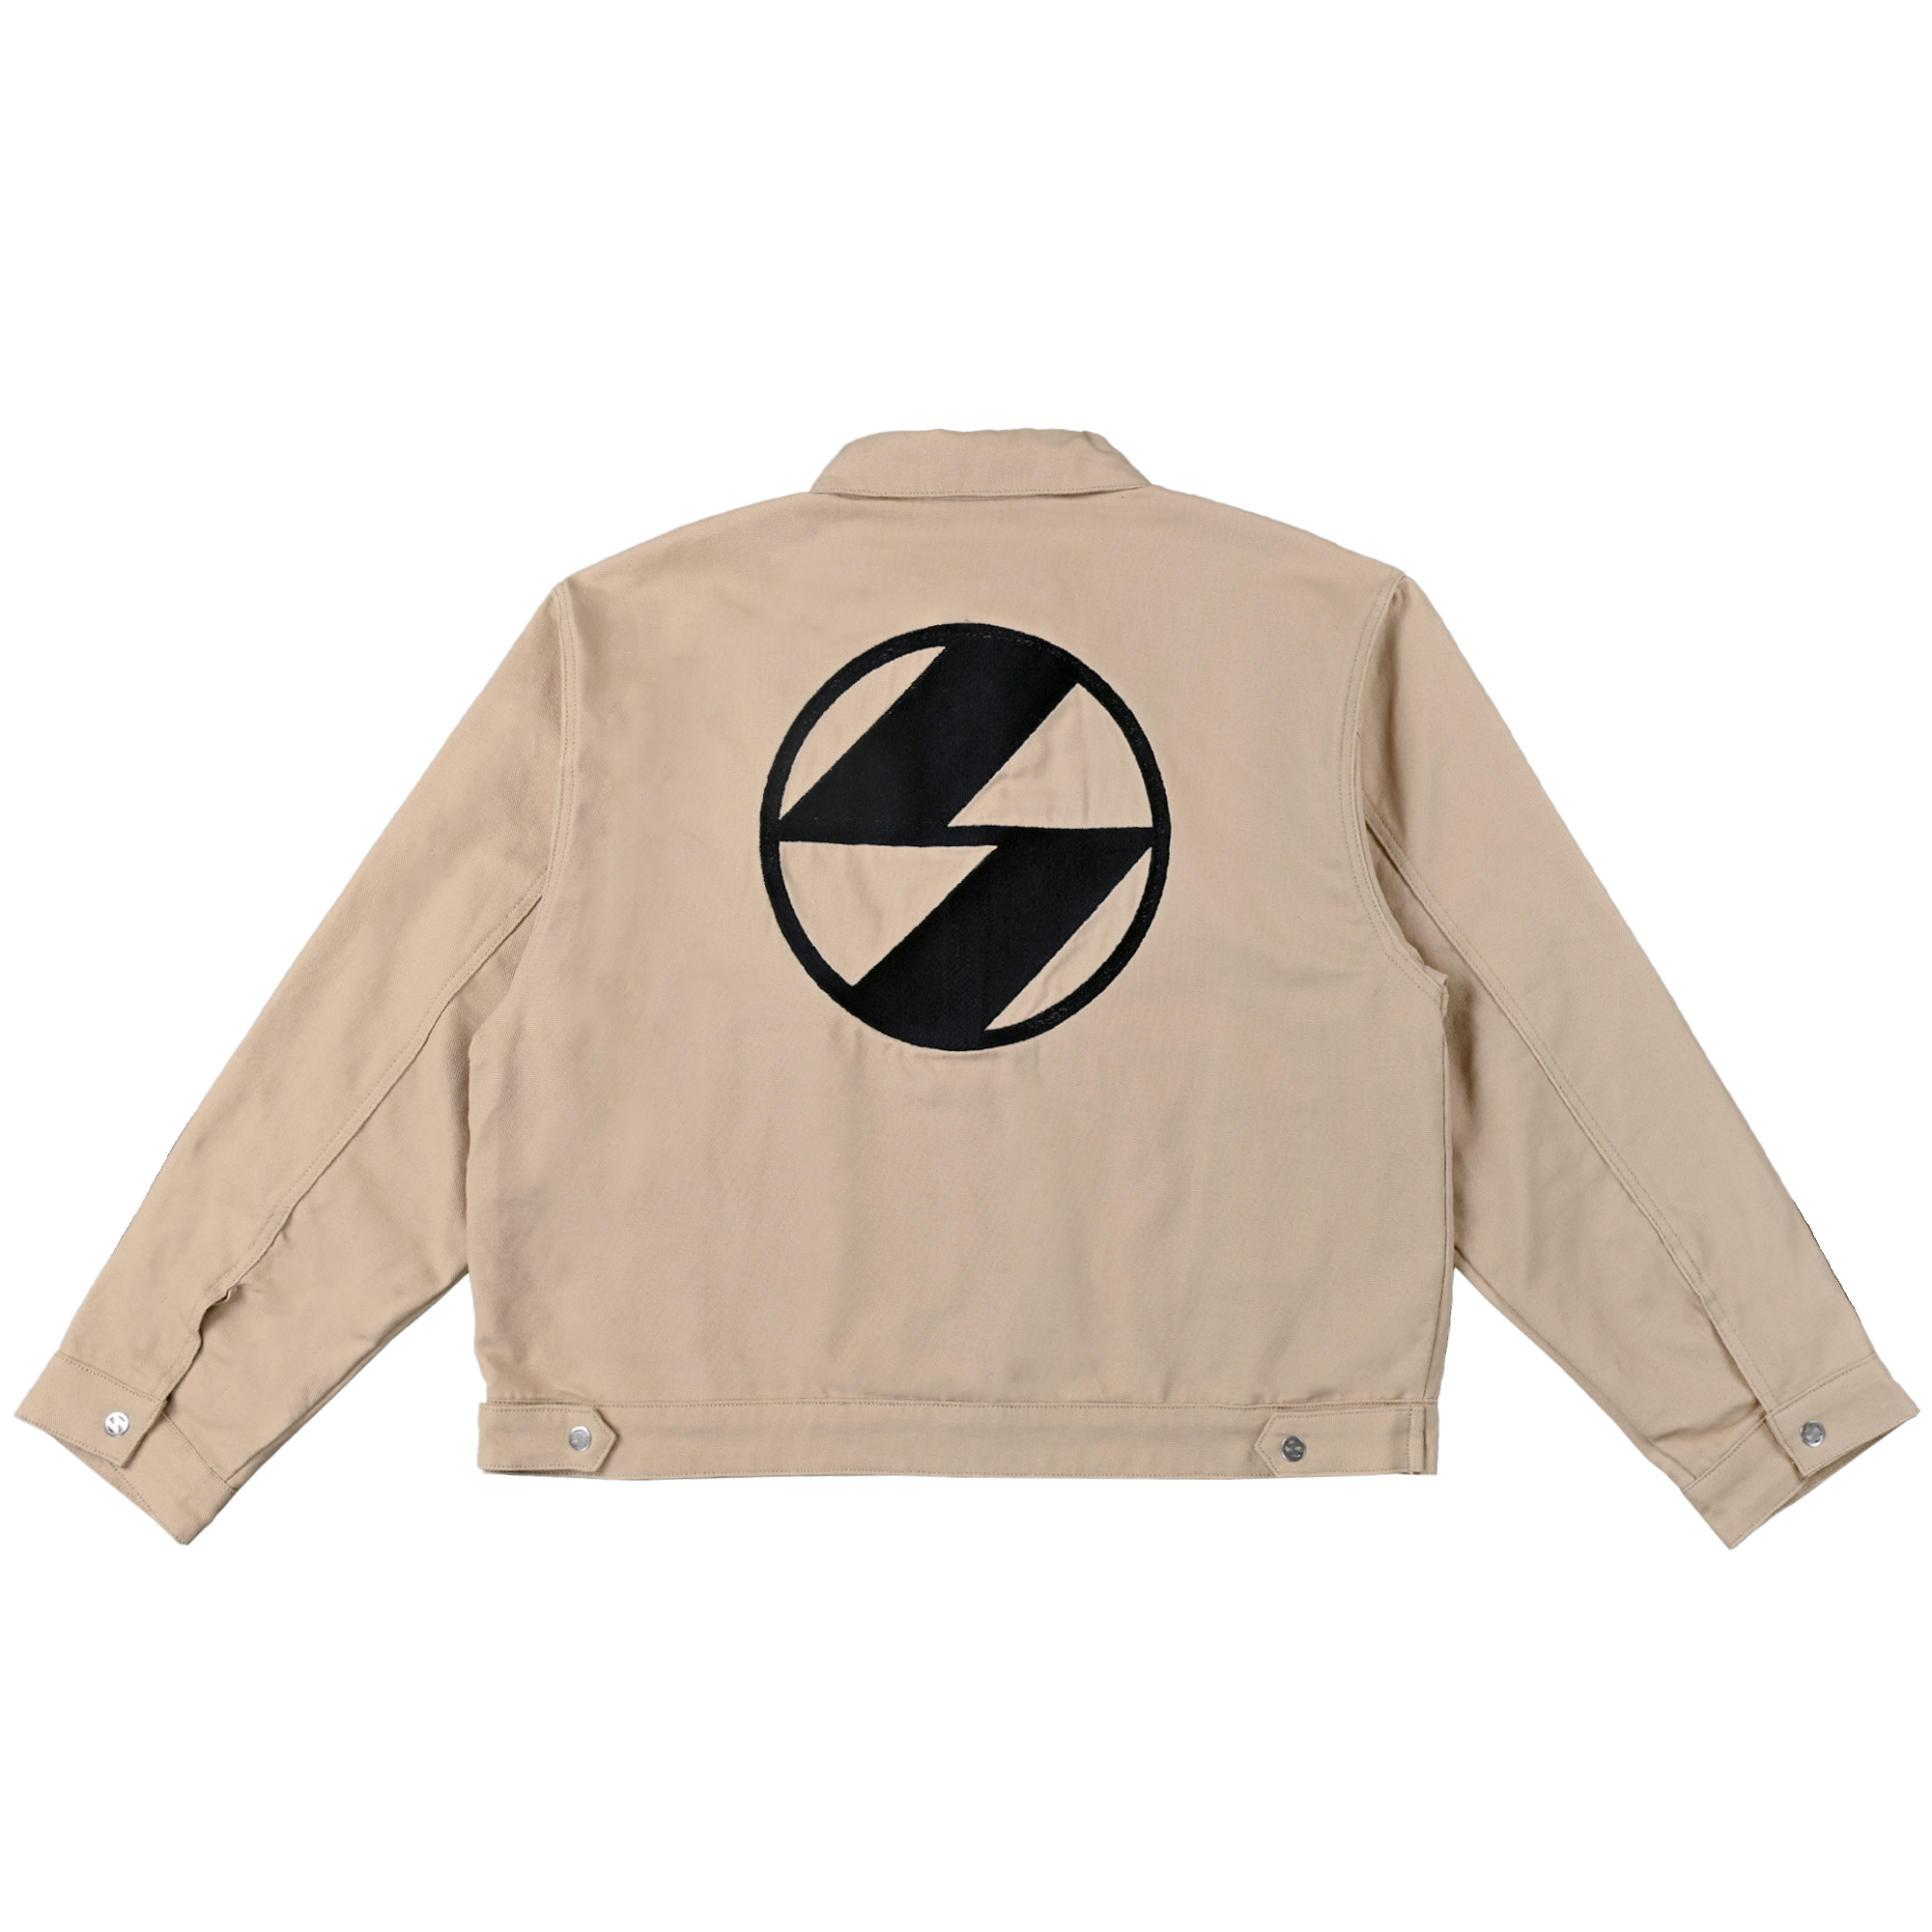 The Salvages 'Sublime' Classic Emblem Work Jacket in Ecru